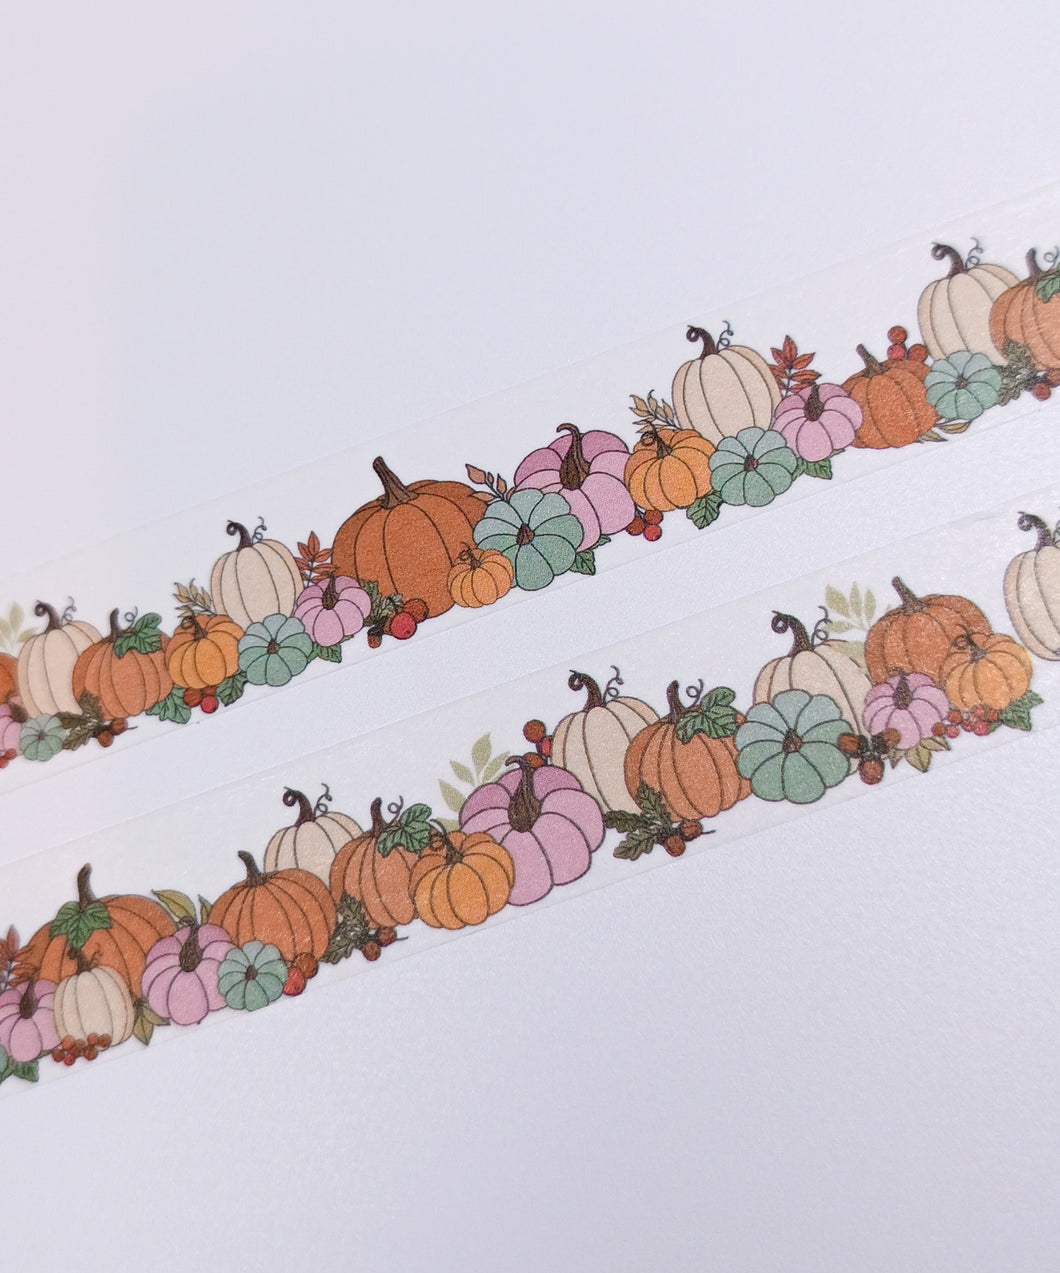 Two strips of Autumn Pumpkin Washi Tape with pumpkins on them by GretelCreates.